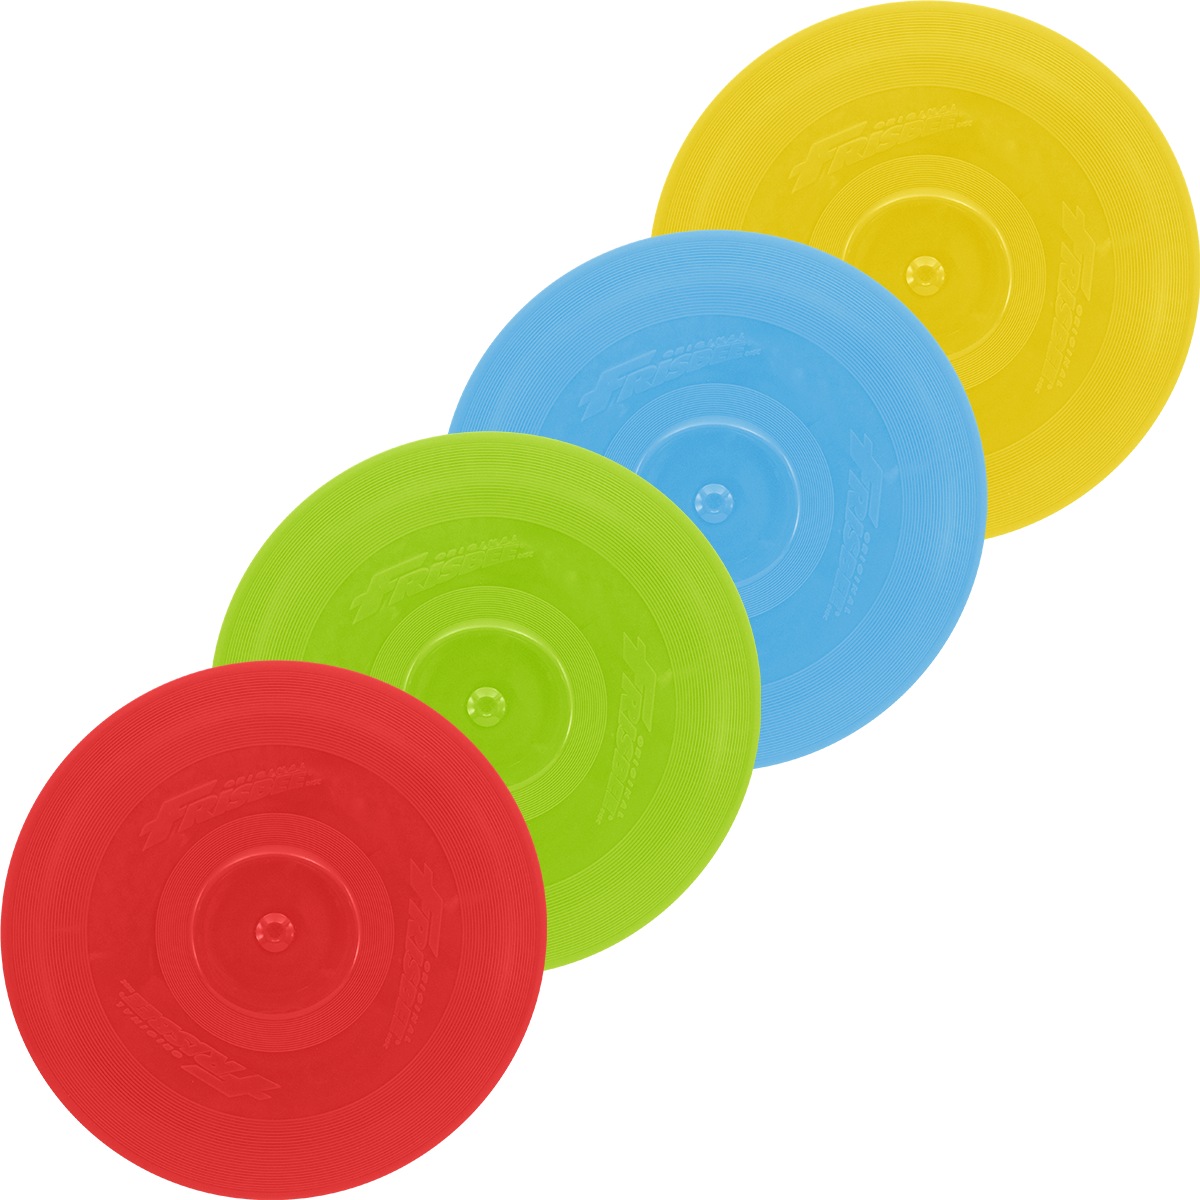 Frisbee® Classic (4 Pack) with four colors (red, green, blue, yellow)